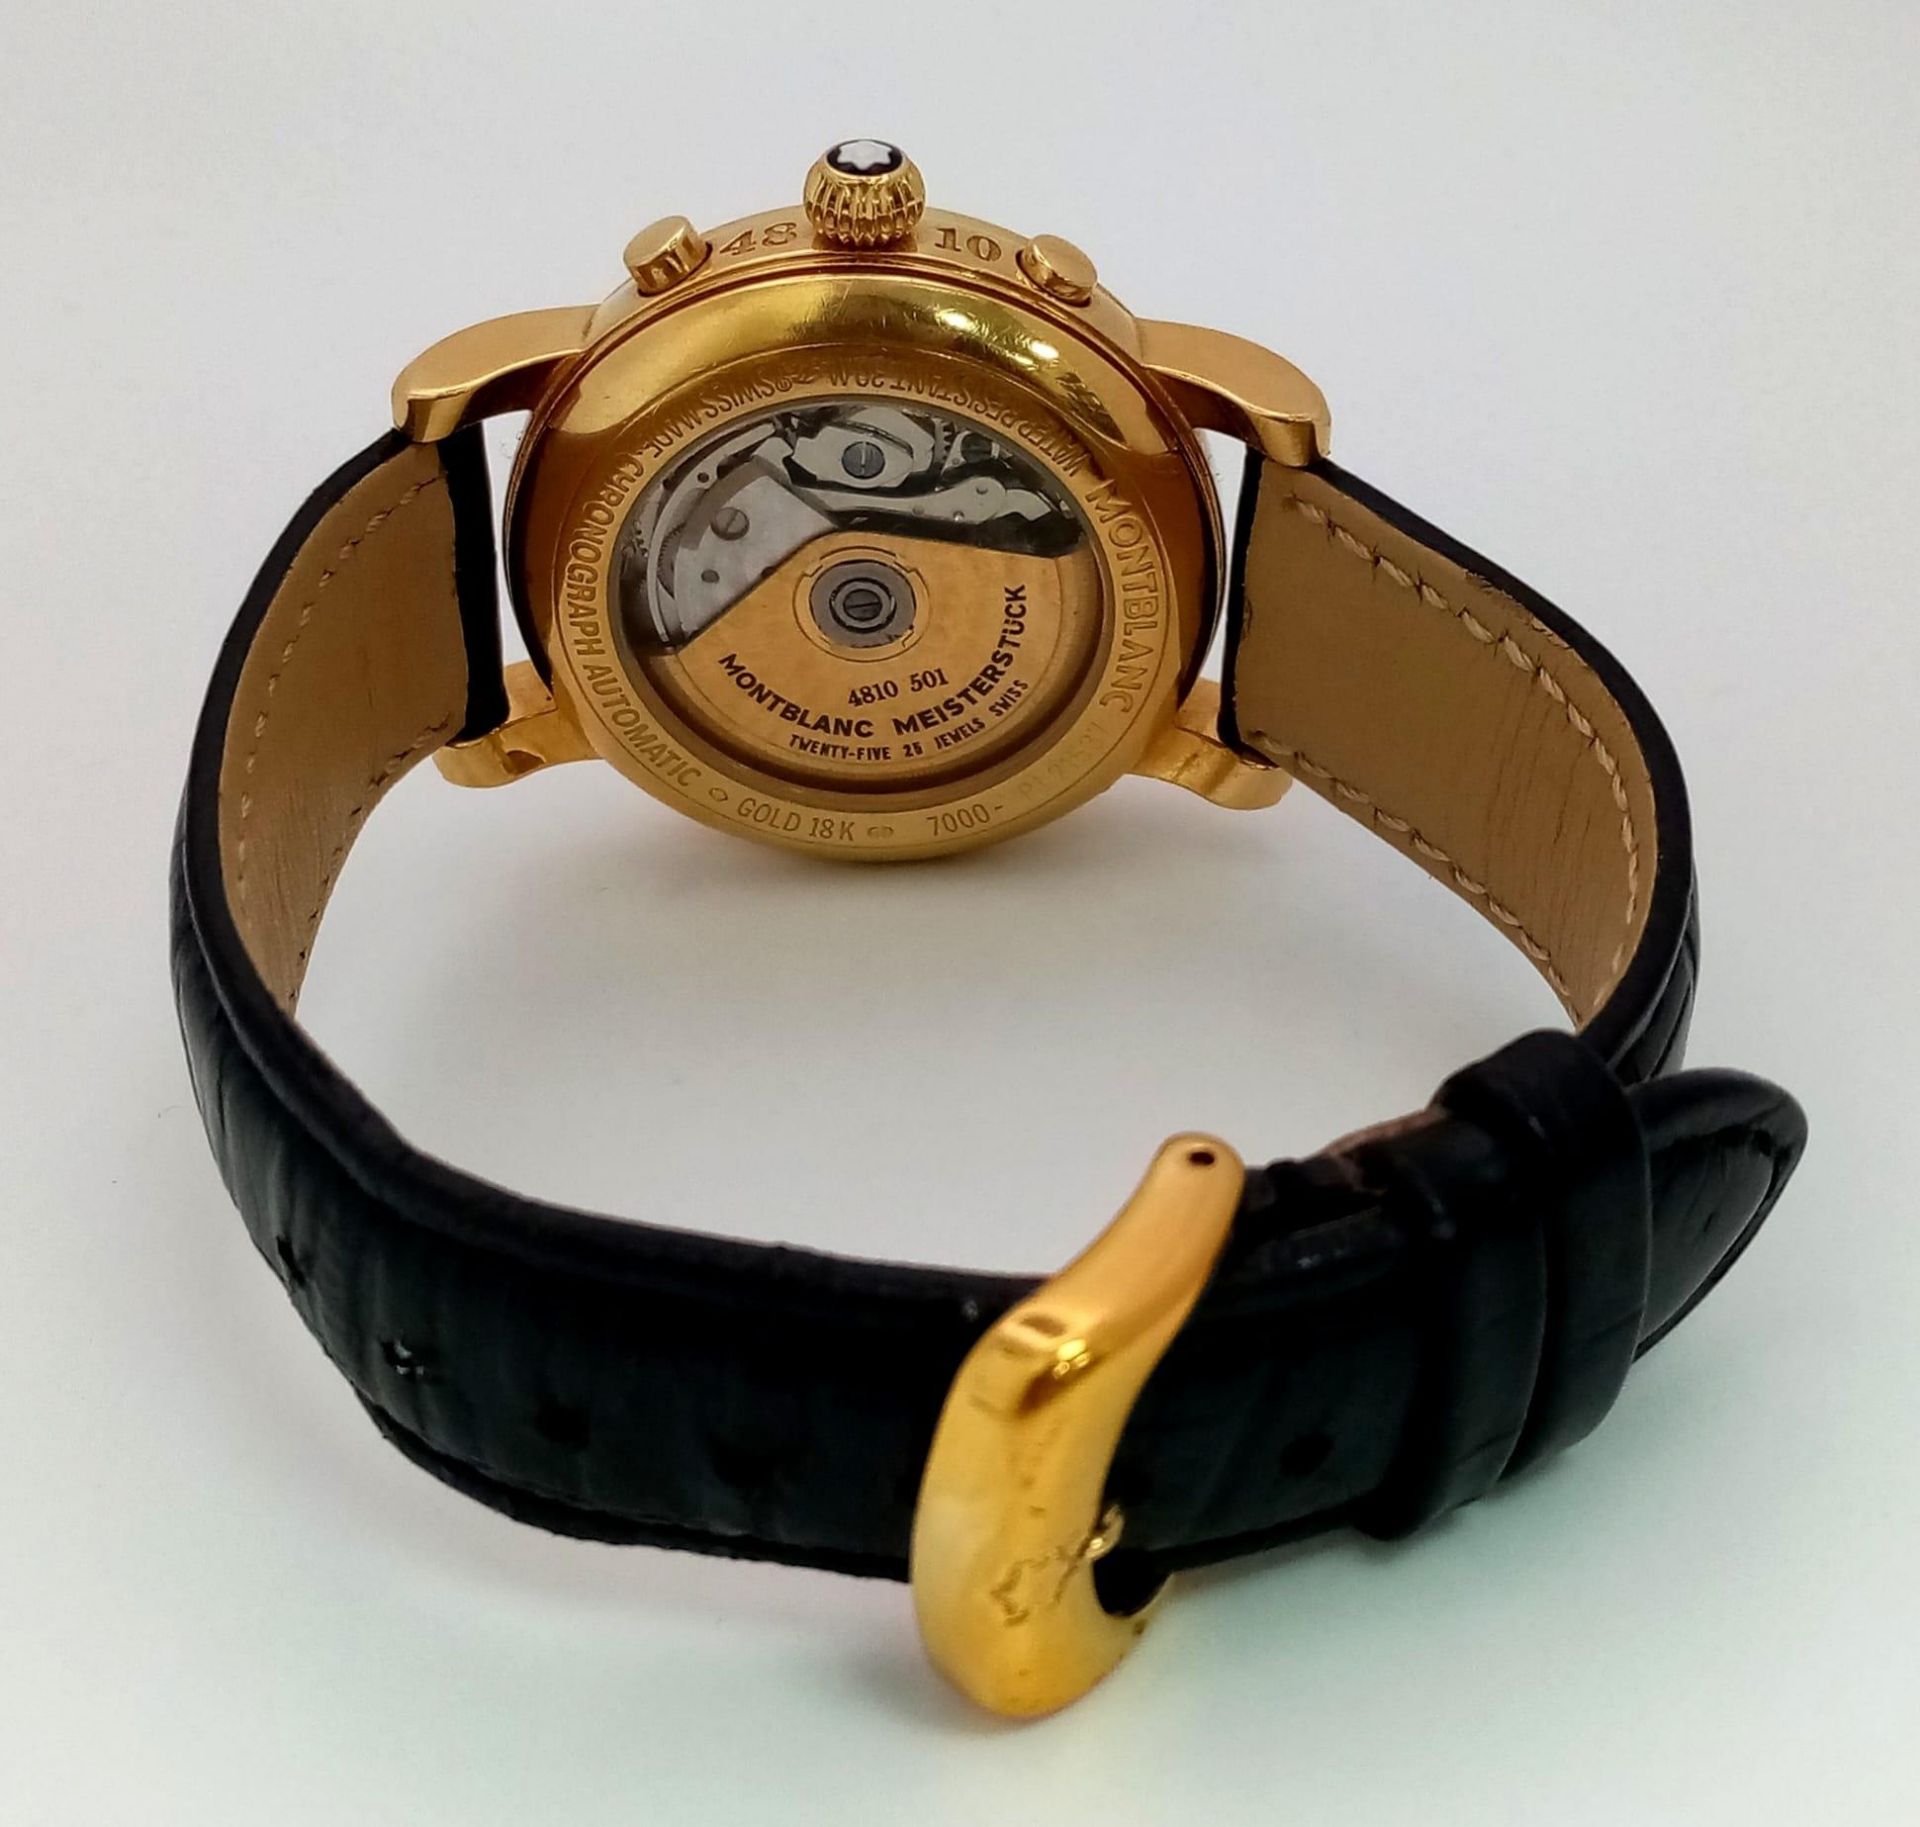 A Montblanc 18K Gold Meisterstuck 4810 Automatic Gents Watch. Black leather strap. 18k gold case - - Image 21 of 23